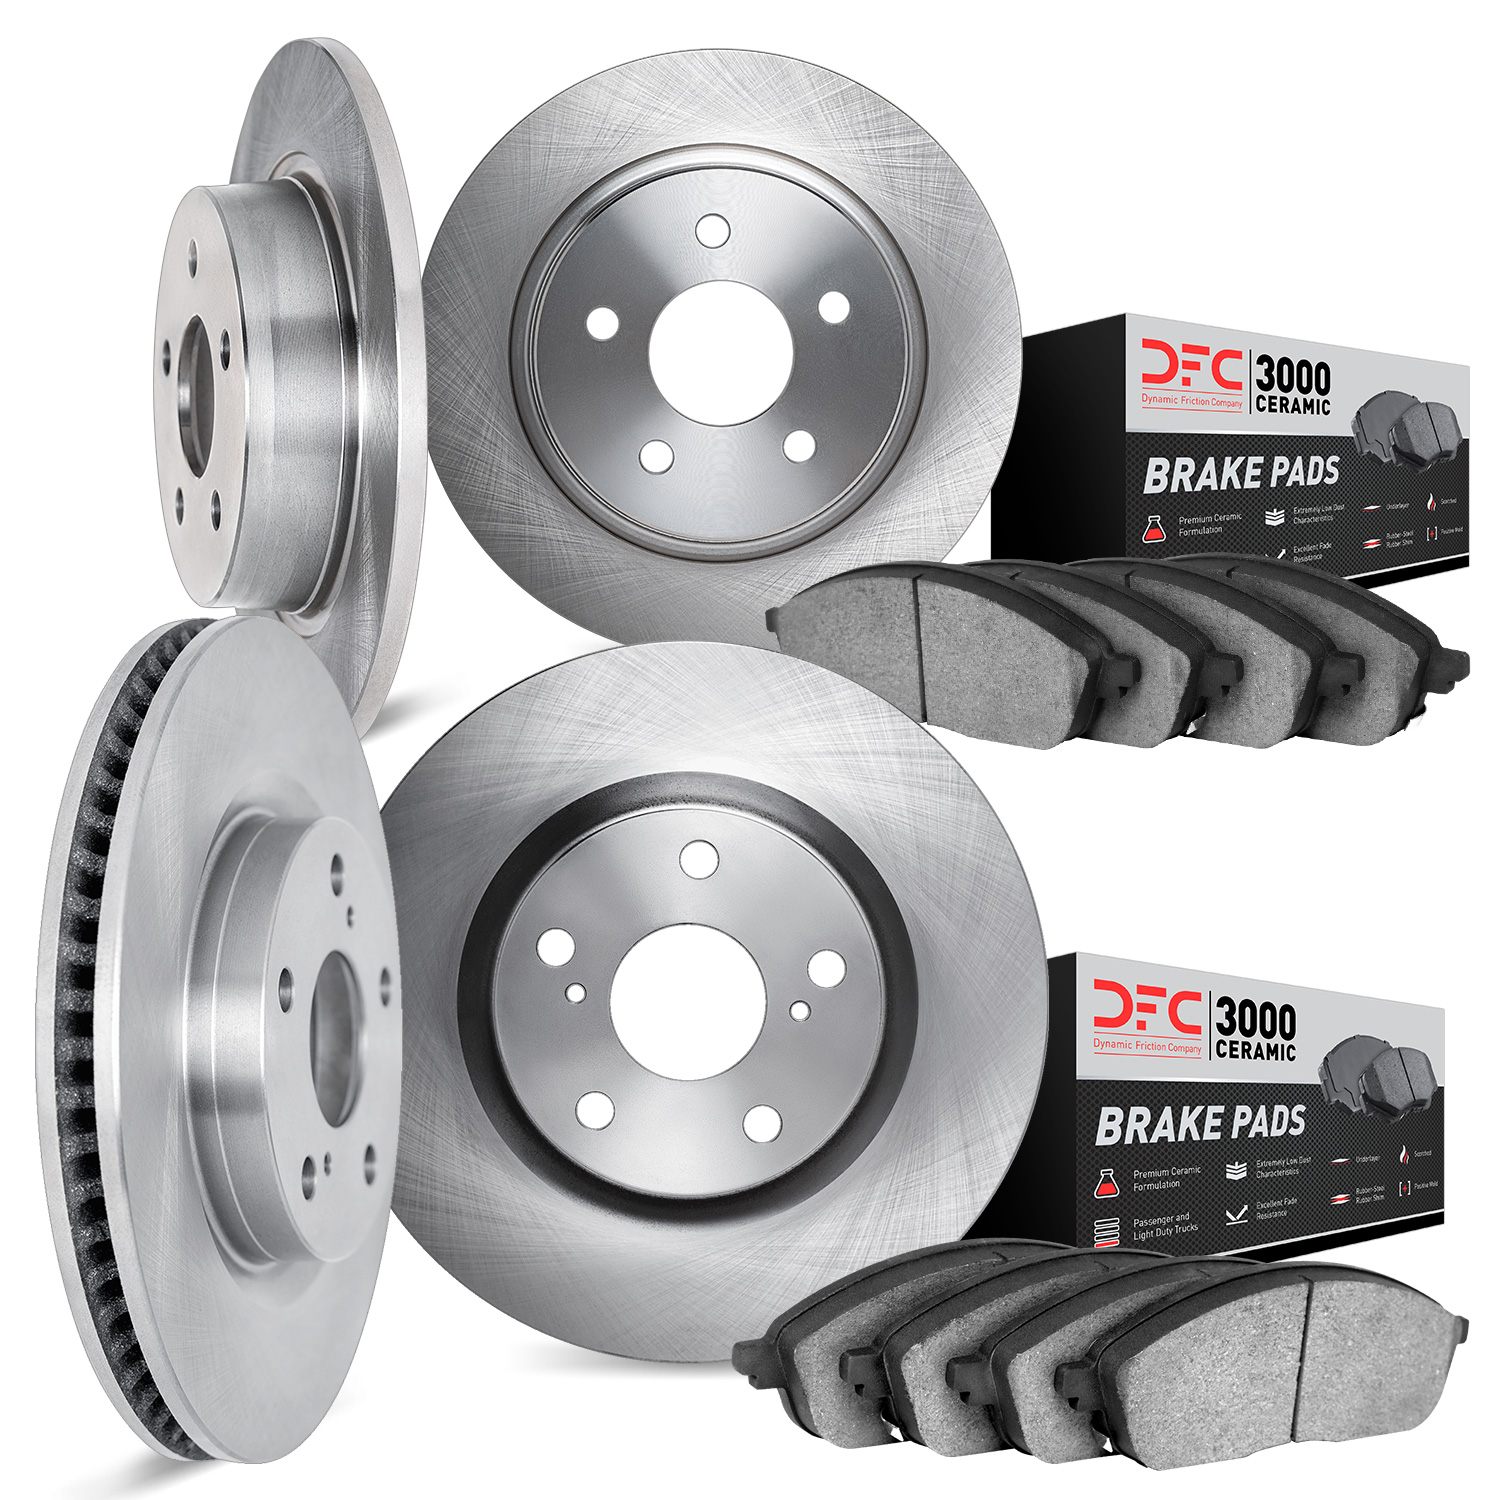 6304-76046 Brake Rotors with 3000-Series Ceramic Brake Pads Kit, 2005-2010 Lexus/Toyota/Scion, Position: Front and Rear